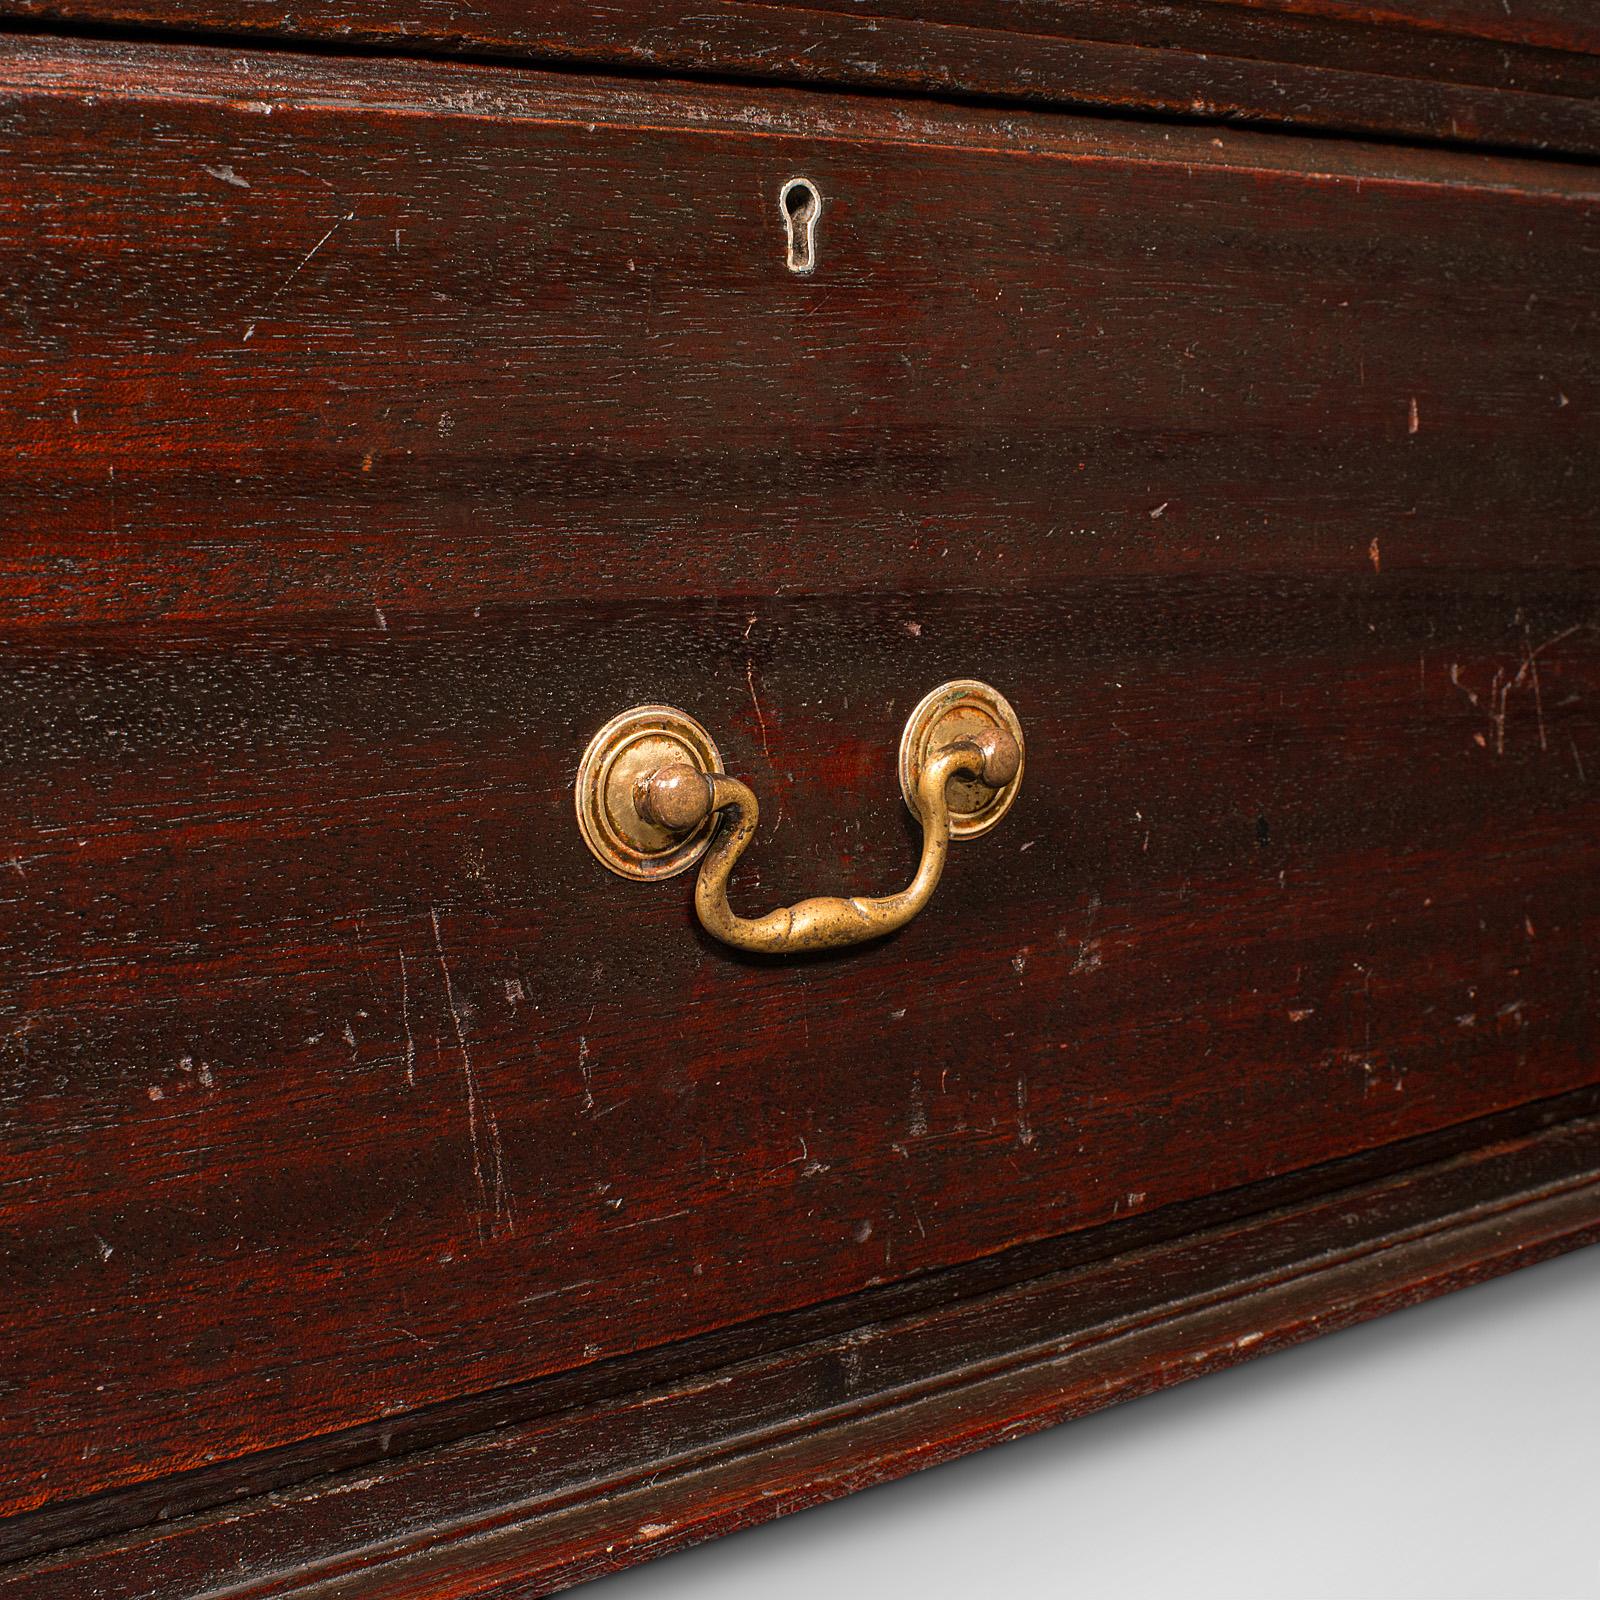 Antique Watchmaker's Cabinet, English, Tabletop Work Chest, Victorian, C.1860 For Sale 1